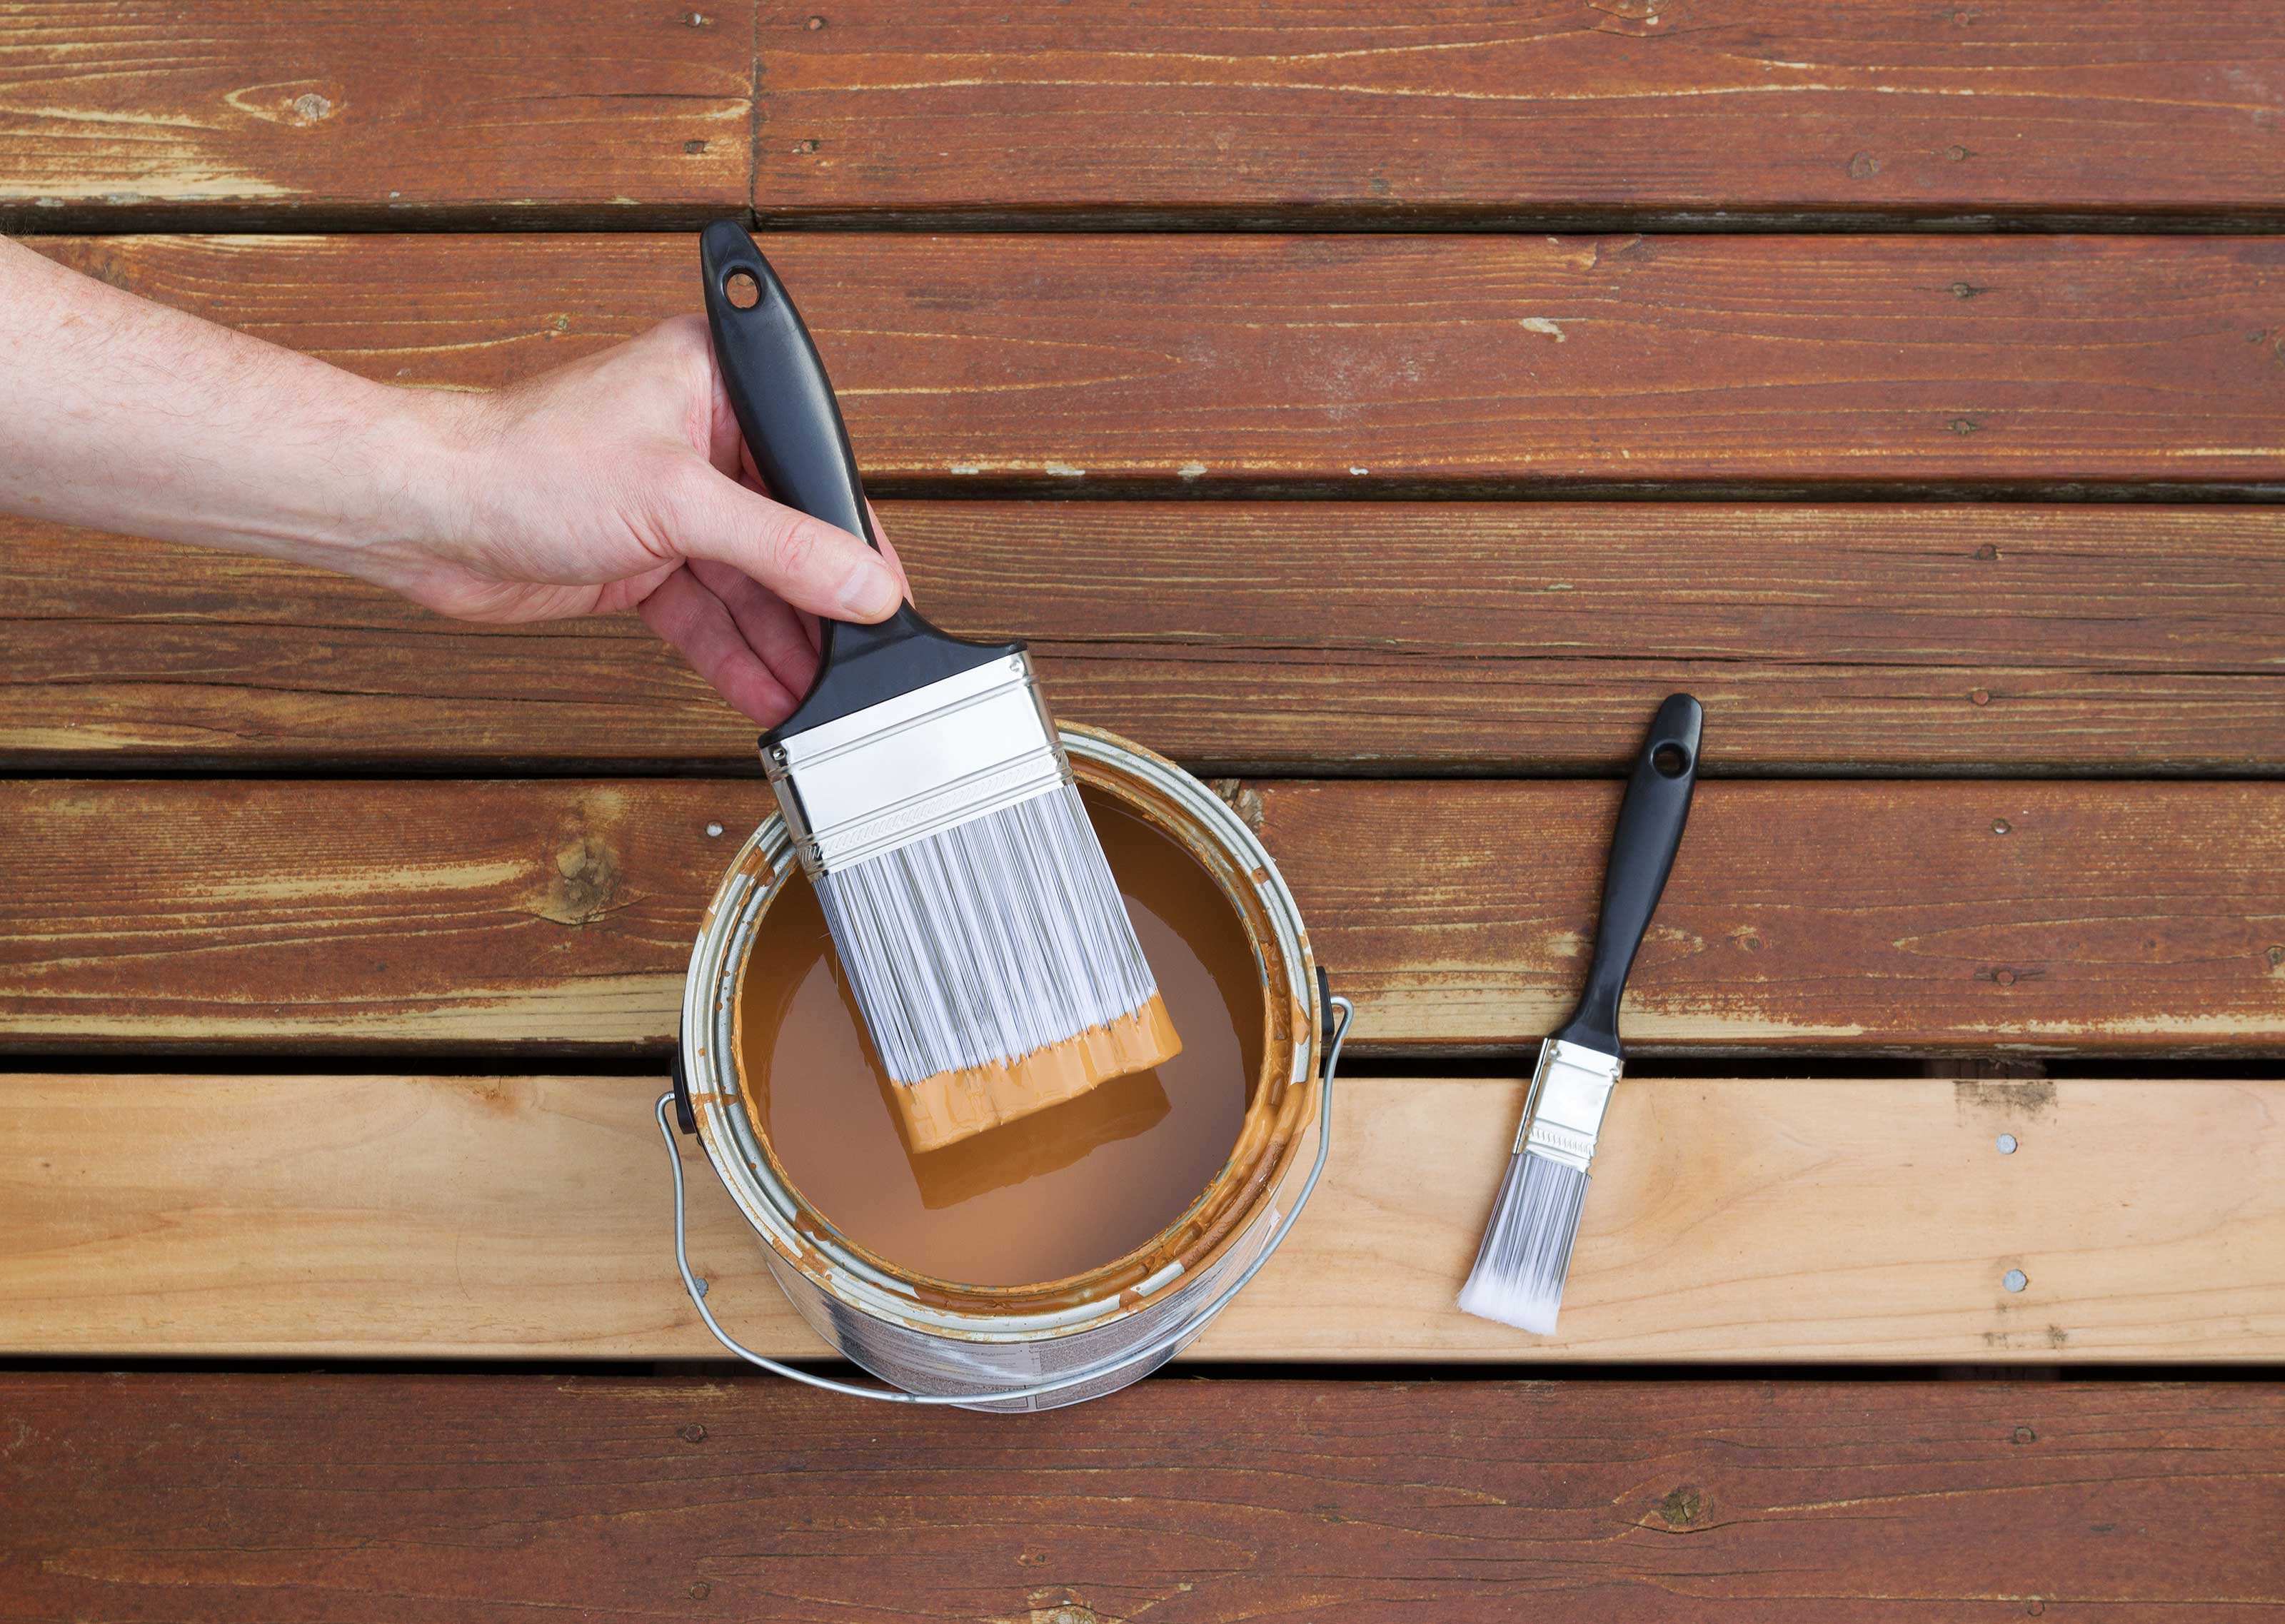 How to paint decking: seal and protect your deck from the elements ...